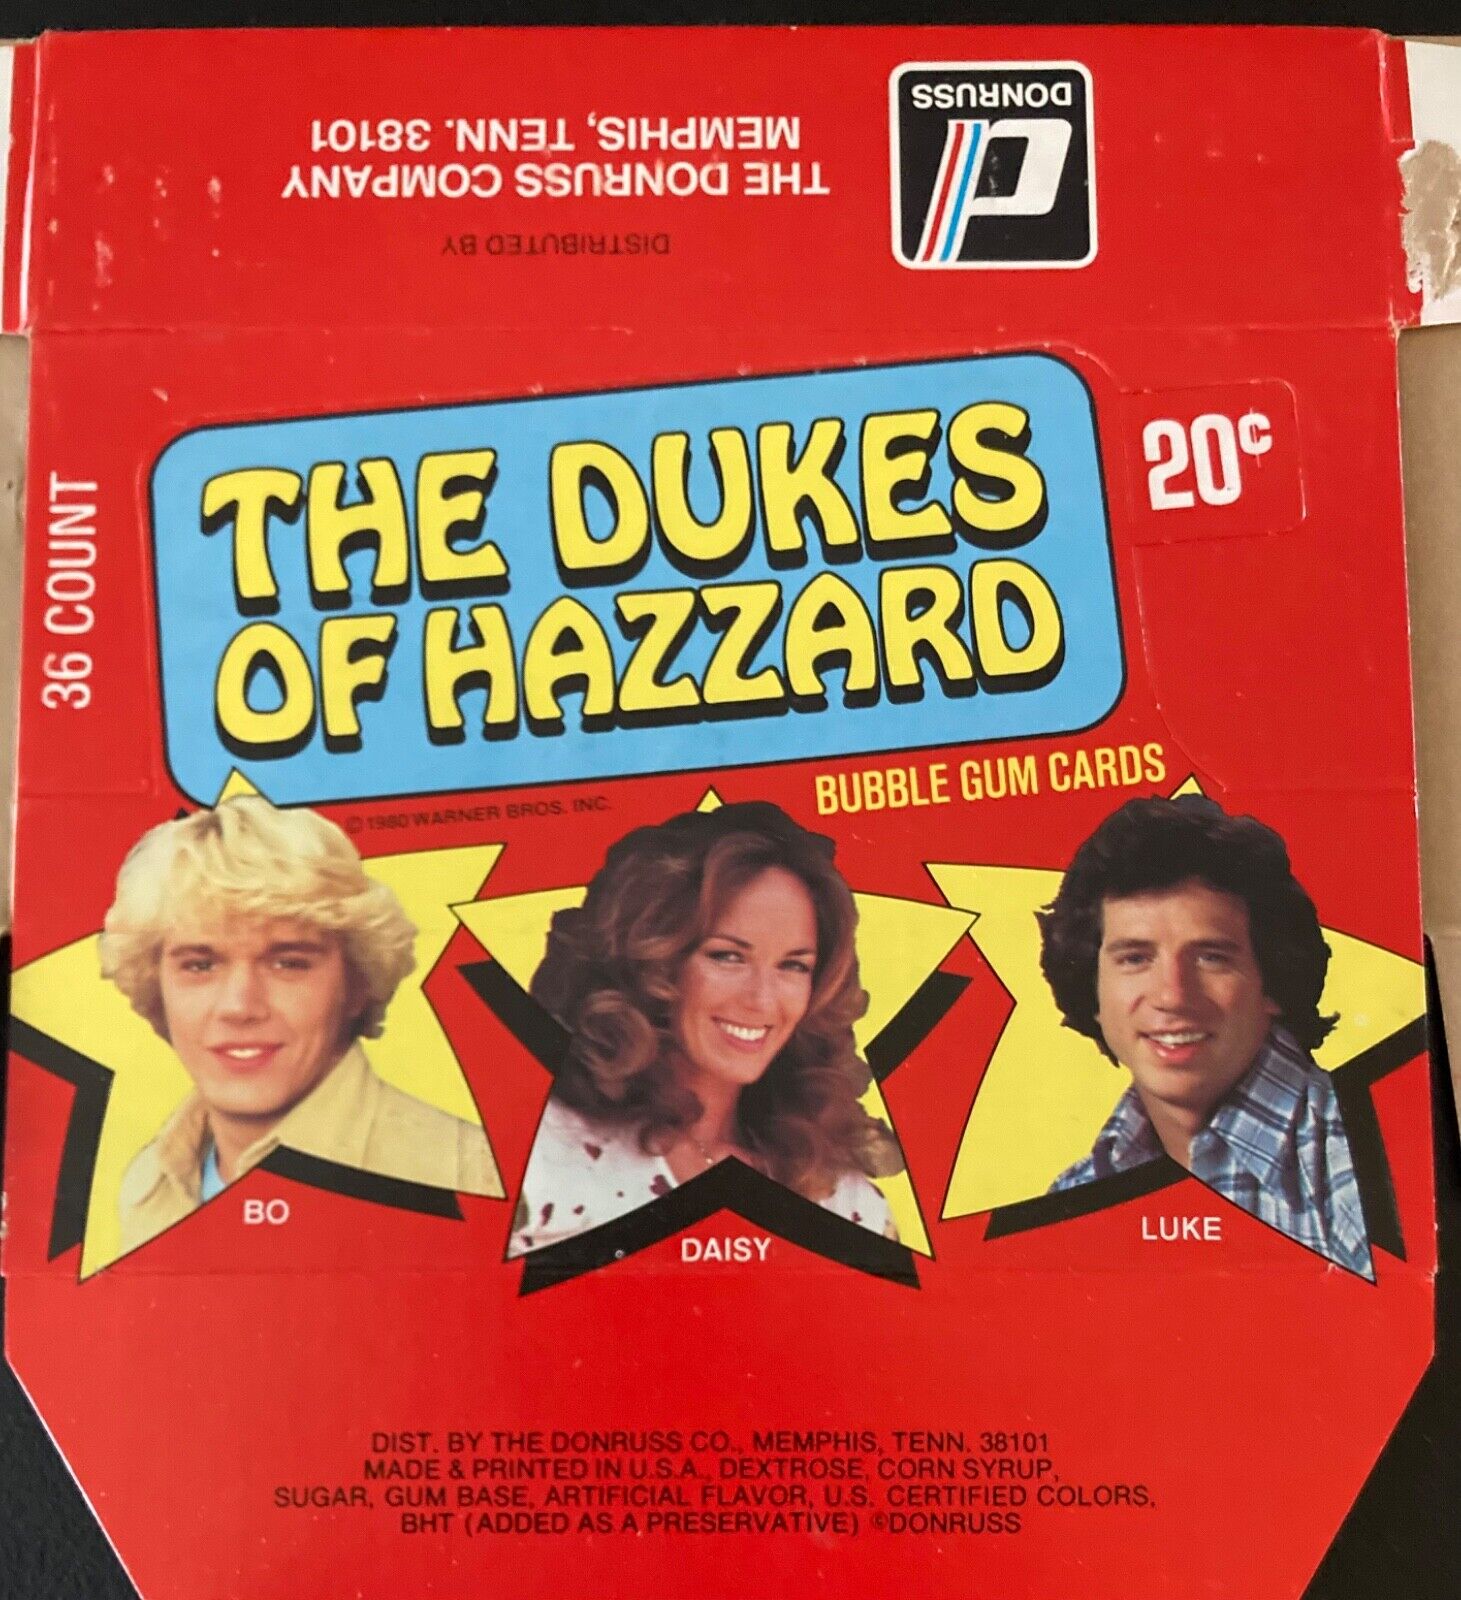 1981 Donruss Dukes of Hazzard Trading Card Box Flat with Wrappers